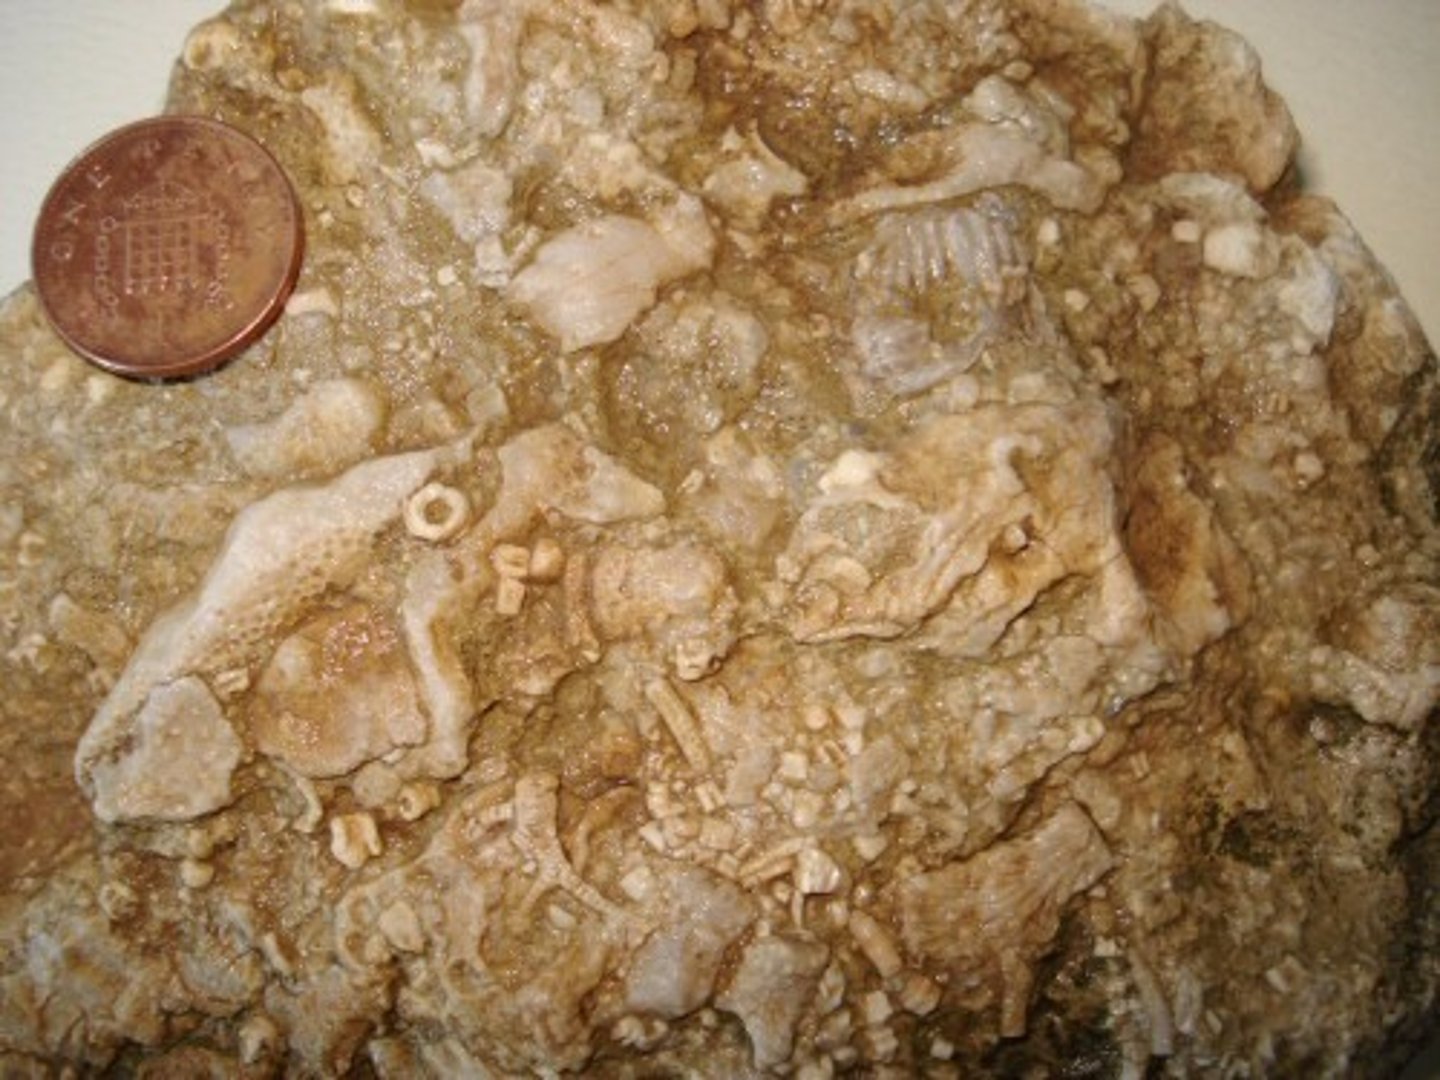 <p>Limestone containing fossils</p>